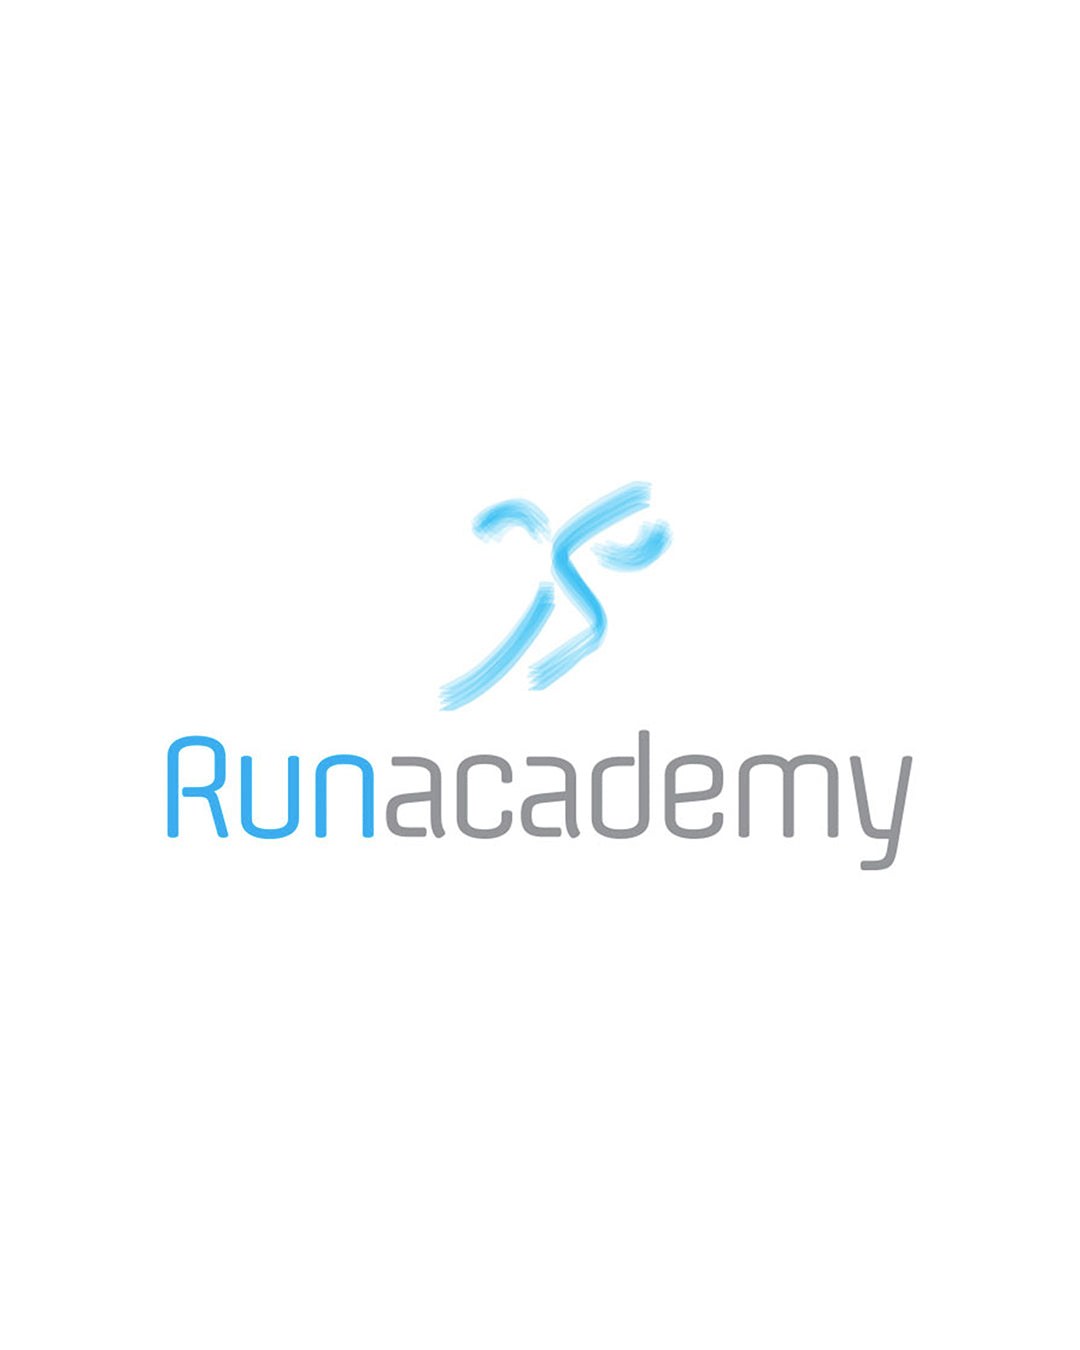 Ortho Movement & Runacademy join forces